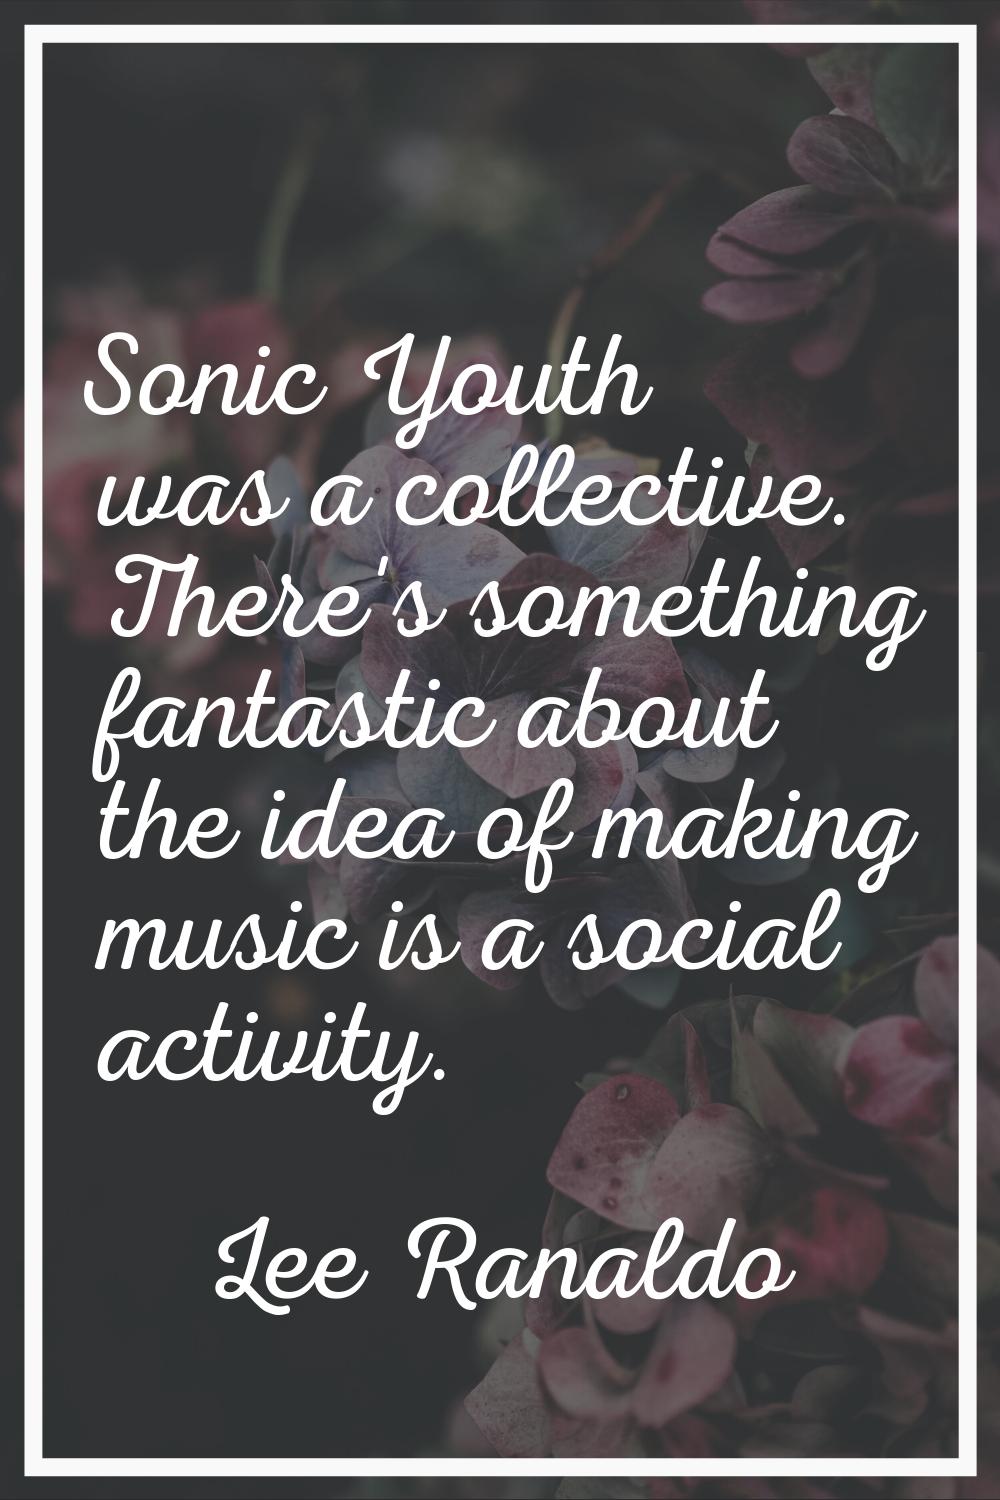 Sonic Youth was a collective. There's something fantastic about the idea of making music is a socia